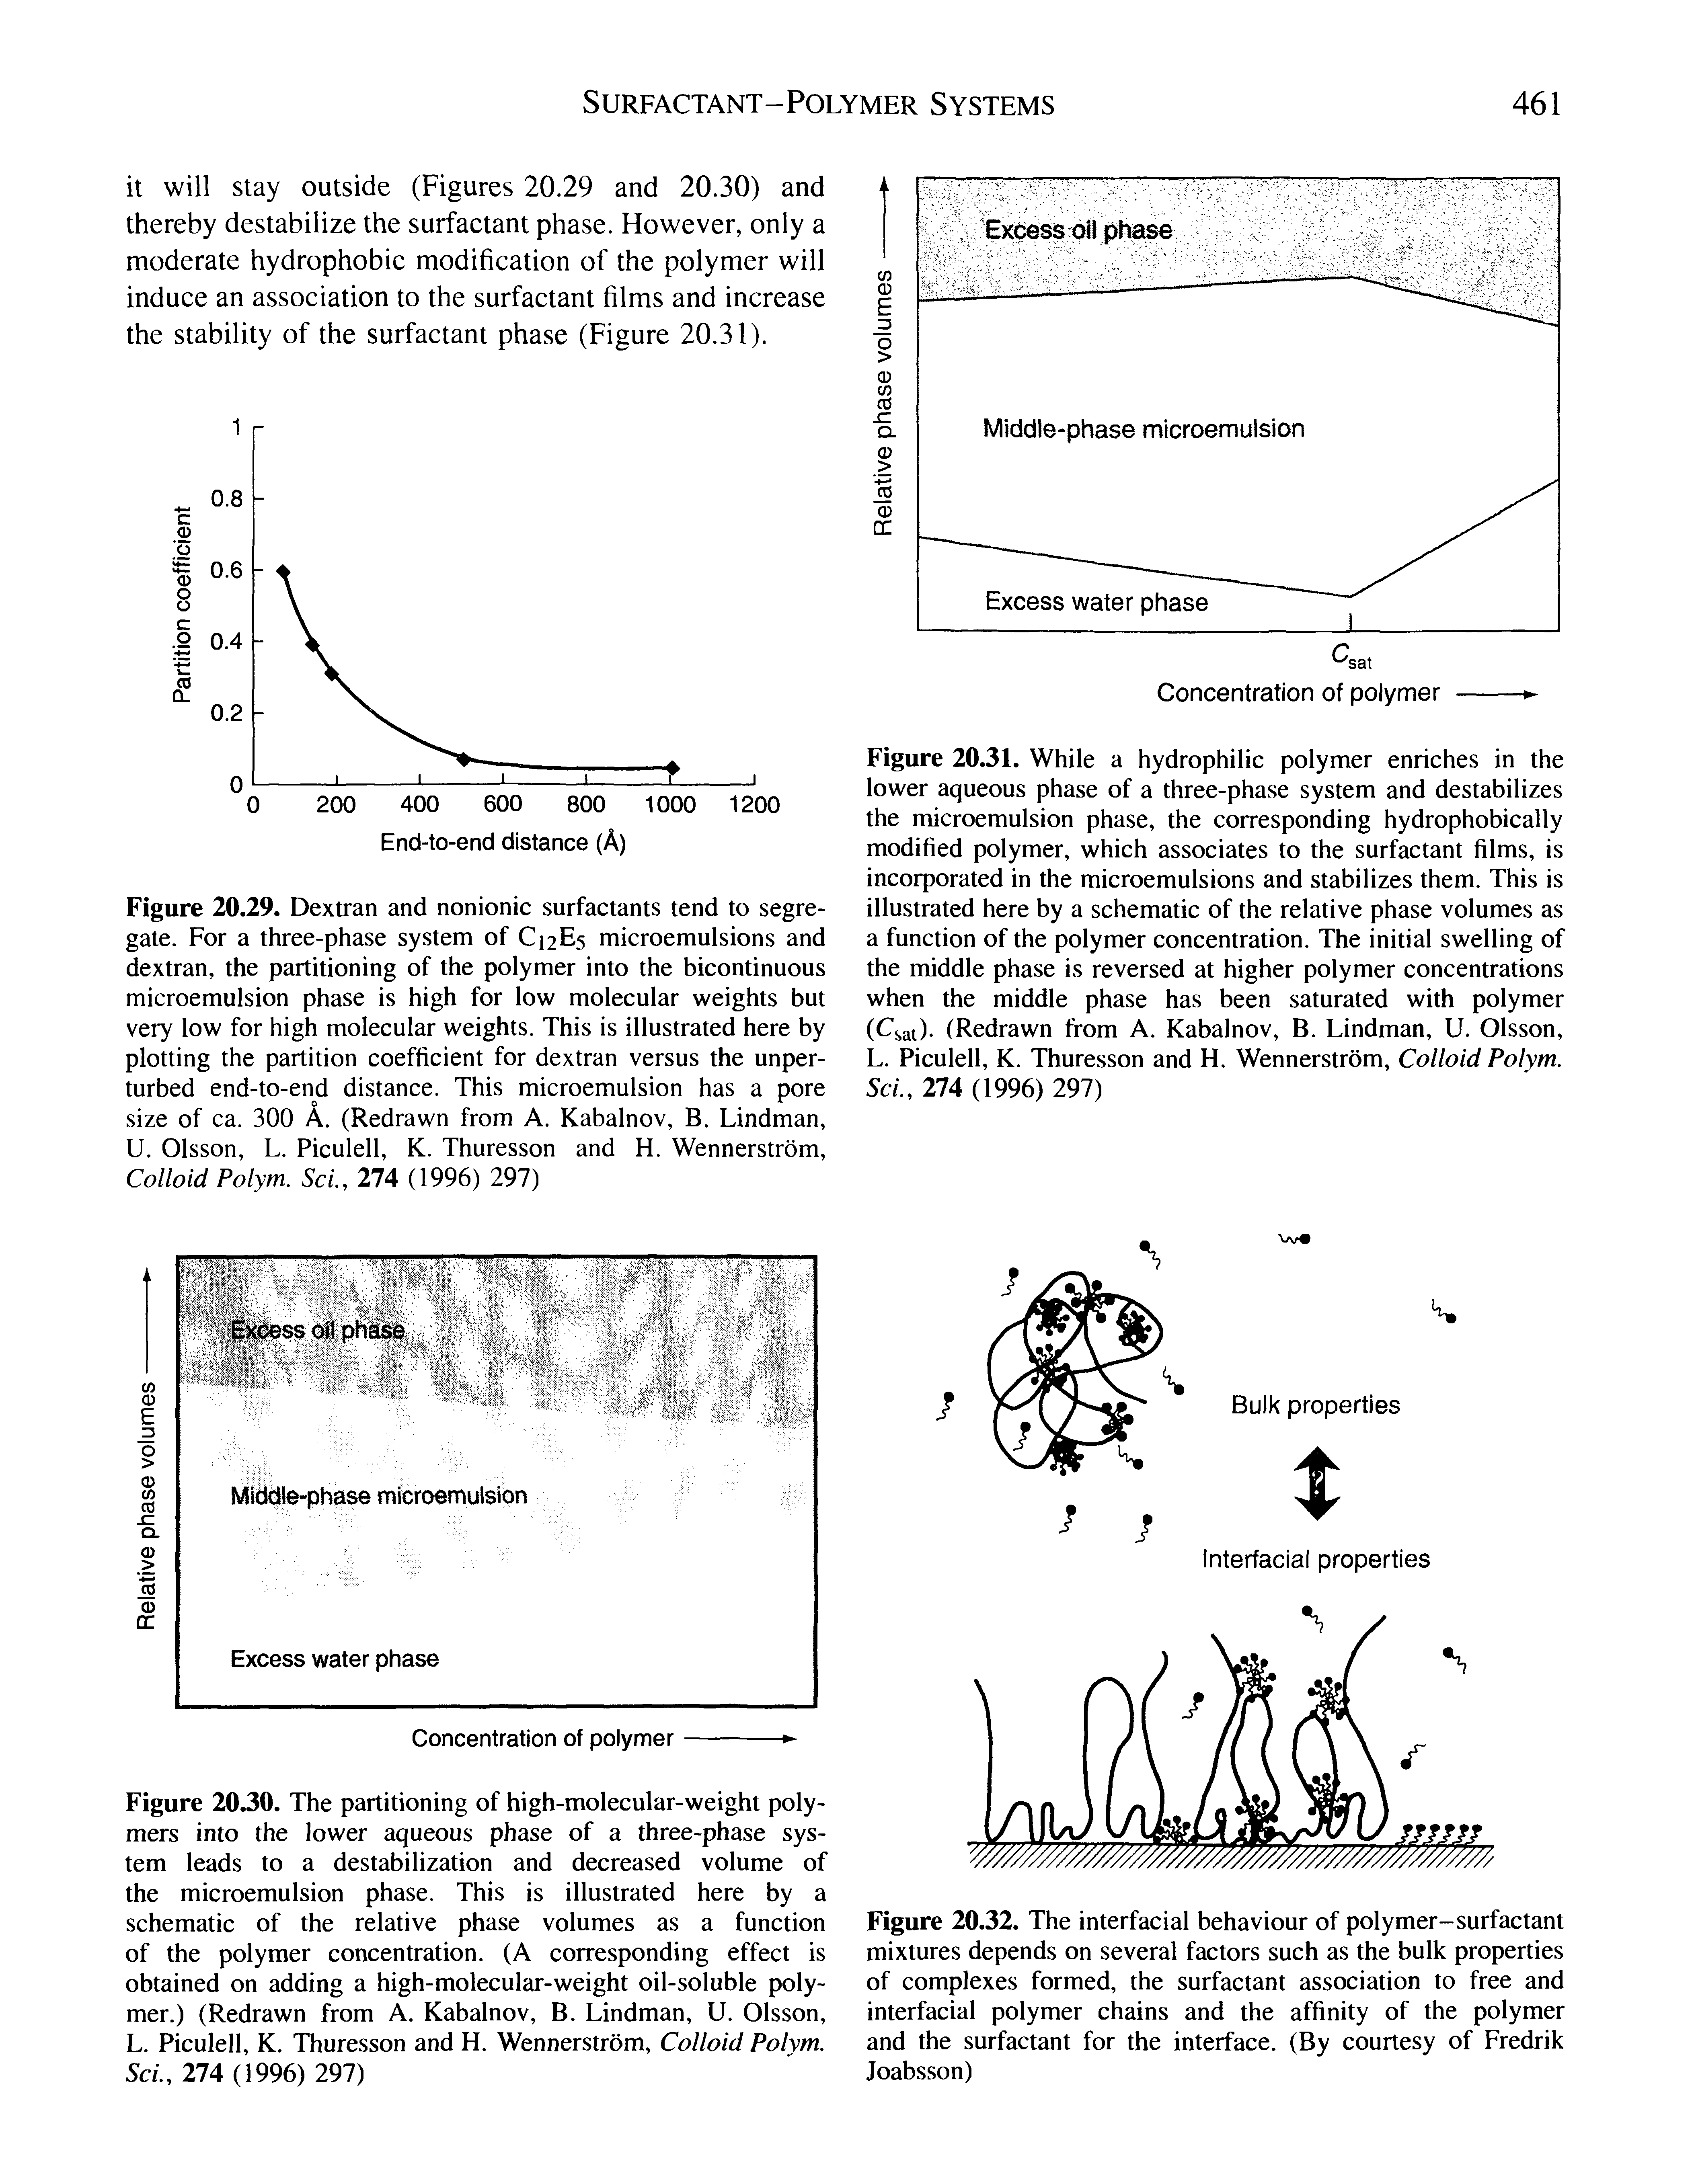 Figure 20.31. While a hydrophilic polymer enriches in the lower aqueous phase of a three-phase system and destabilizes the microemulsion phase, the corresponding hydrophobically modified polymer, which associates to the surfactant films, is incorporated in the microemulsions and stabilizes them. This is illustrated here by a schematic of the relative phase volumes as a function of the polymer concentration. The initial swelling of the middle phase is reversed at higher polymer concentrations when the middle phase has been saturated with polymer (Qat)- (Redrawn from A. Kabalnov, B. Lindman, U. Olsson, L. Piculell, K. Thuresson and H. Wennerstrbm, Colloid Polym. ScL, 274 (1996) 297)...